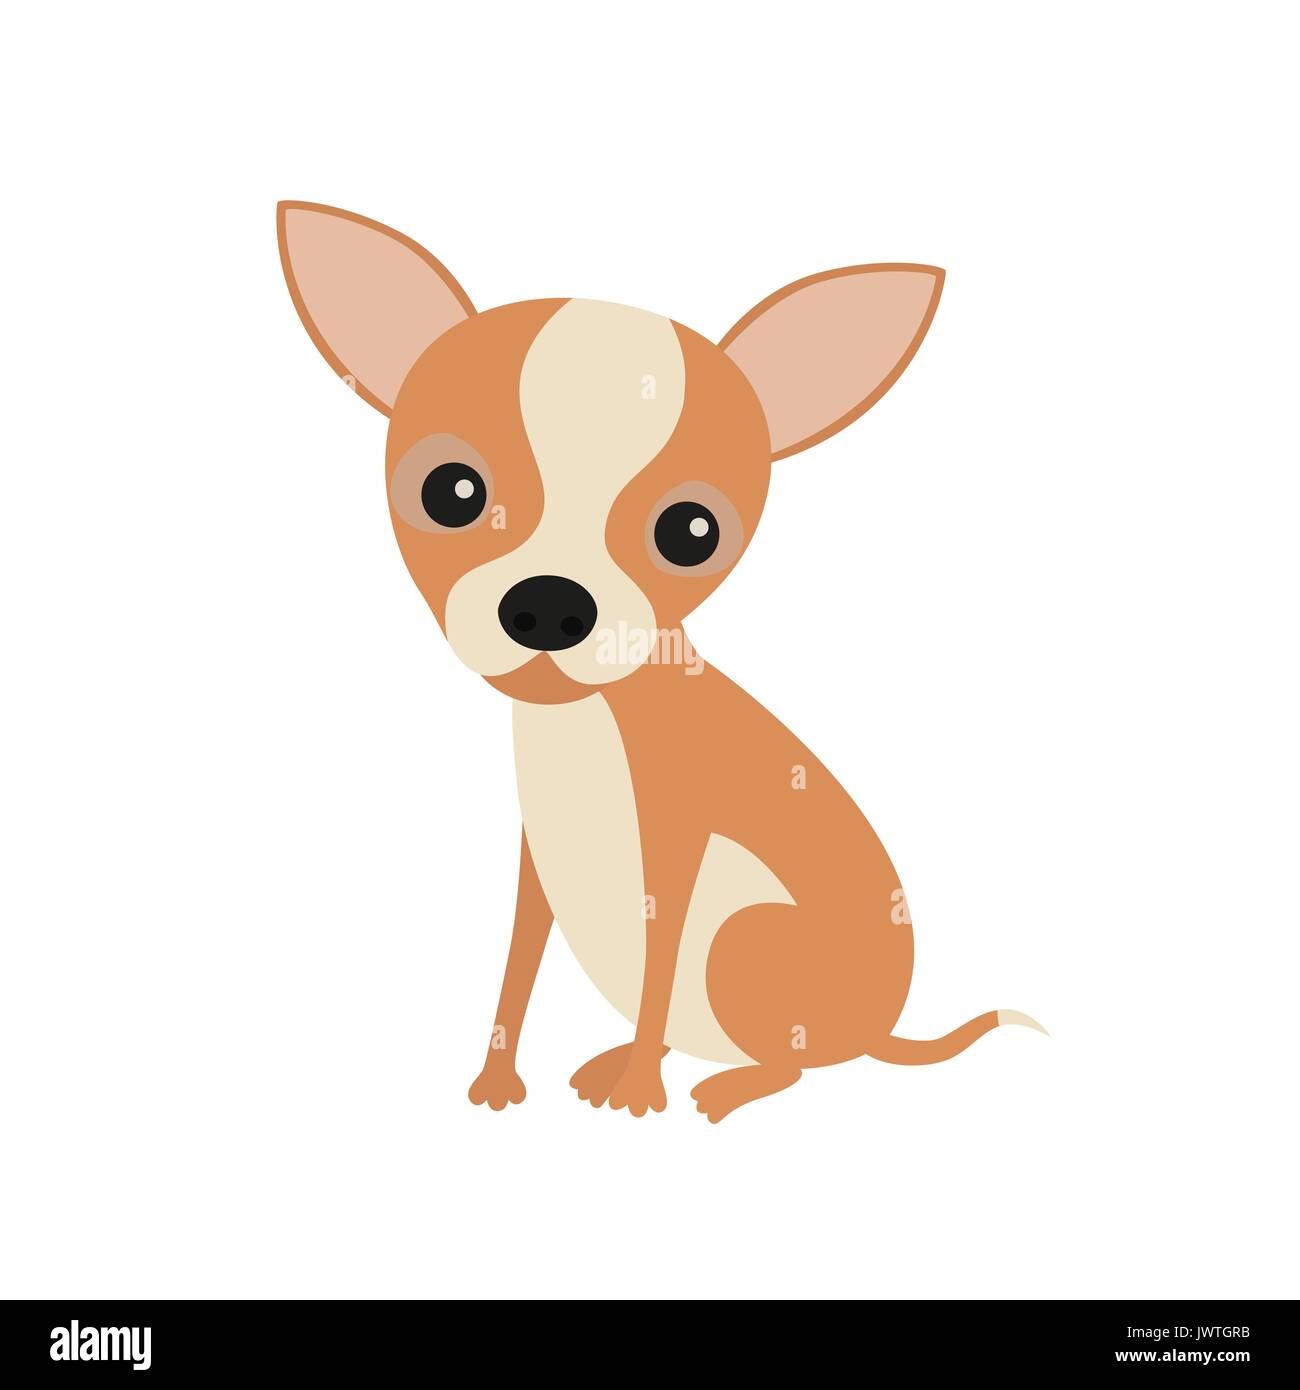 Pocket dog Cut Out Stock Images & Pictures - Alamy